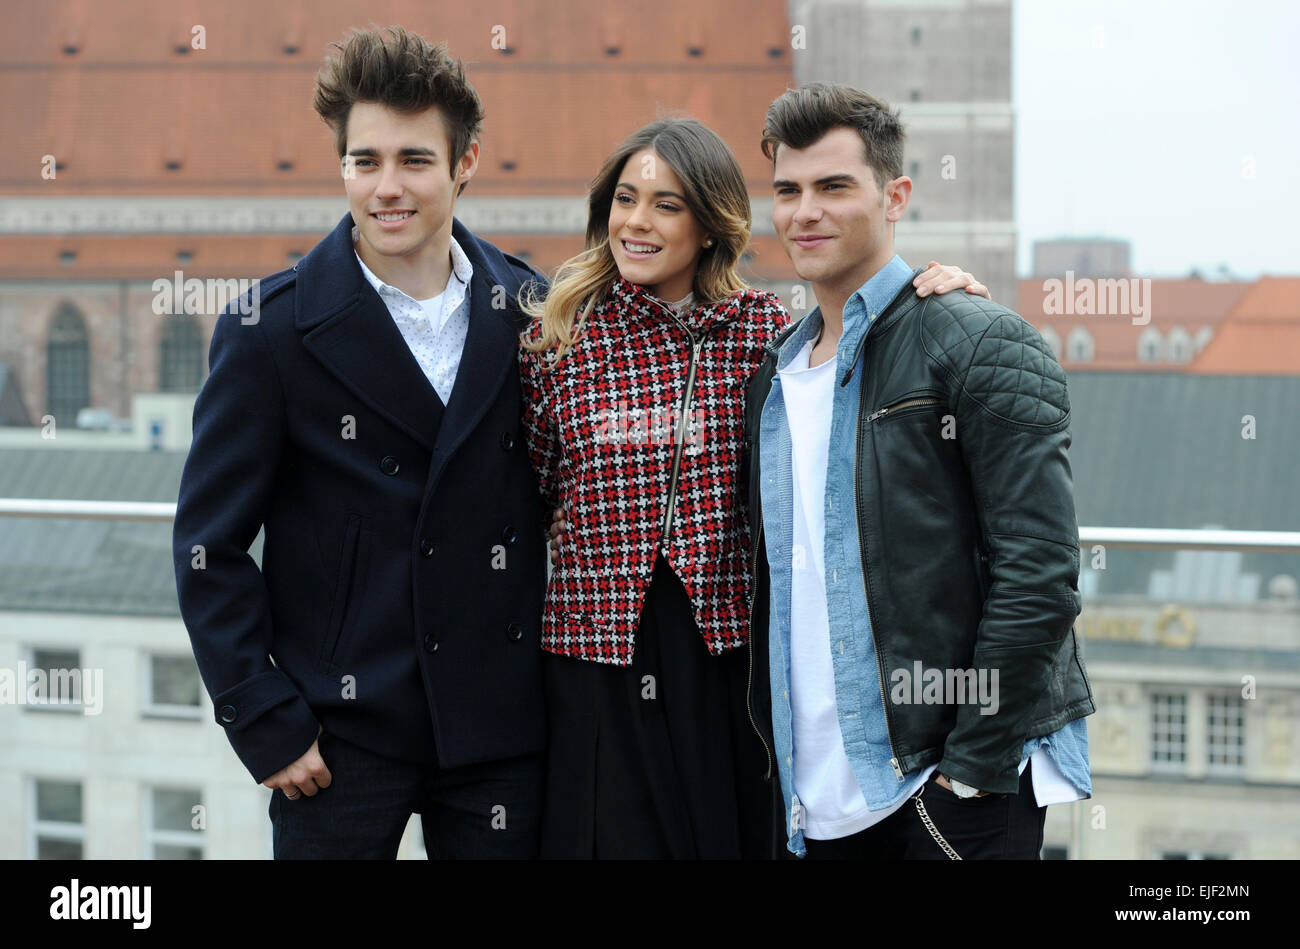 Munich, Germany. 25th Mar, 2015. Actors Jorge Blanco (l-r) (Mexico, as Leon), Martina Stoessel (Argentina, as Violetta) and Diego Dominguez (Spain, as Diego) pose during a press event on the roof of a hotel in Munich, Germany, 25 March 2015. The actors are promoting the new Disney TV show 'Violetta' in Germany. PHOTO: TOBIAS HASE/dpa/Alamy Live News Stock Photo